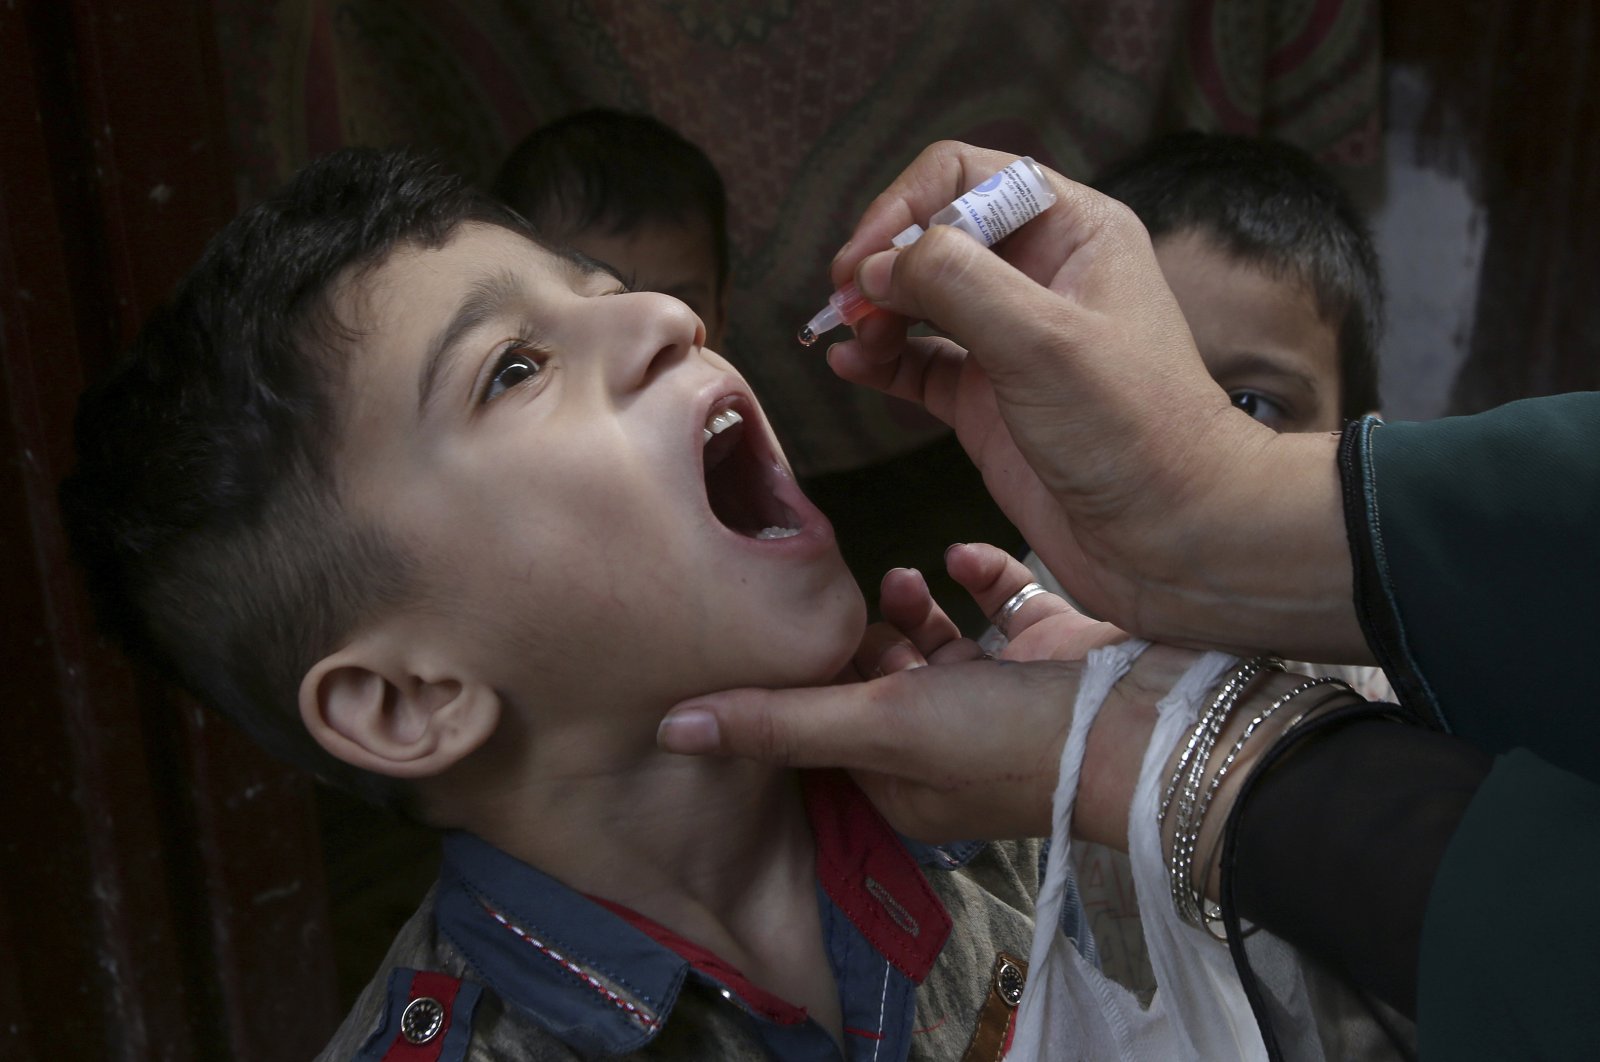 A health worker gives a polio vaccine to a child in Peshawar, Pakistan, June 27, 2022. (AP Photo)